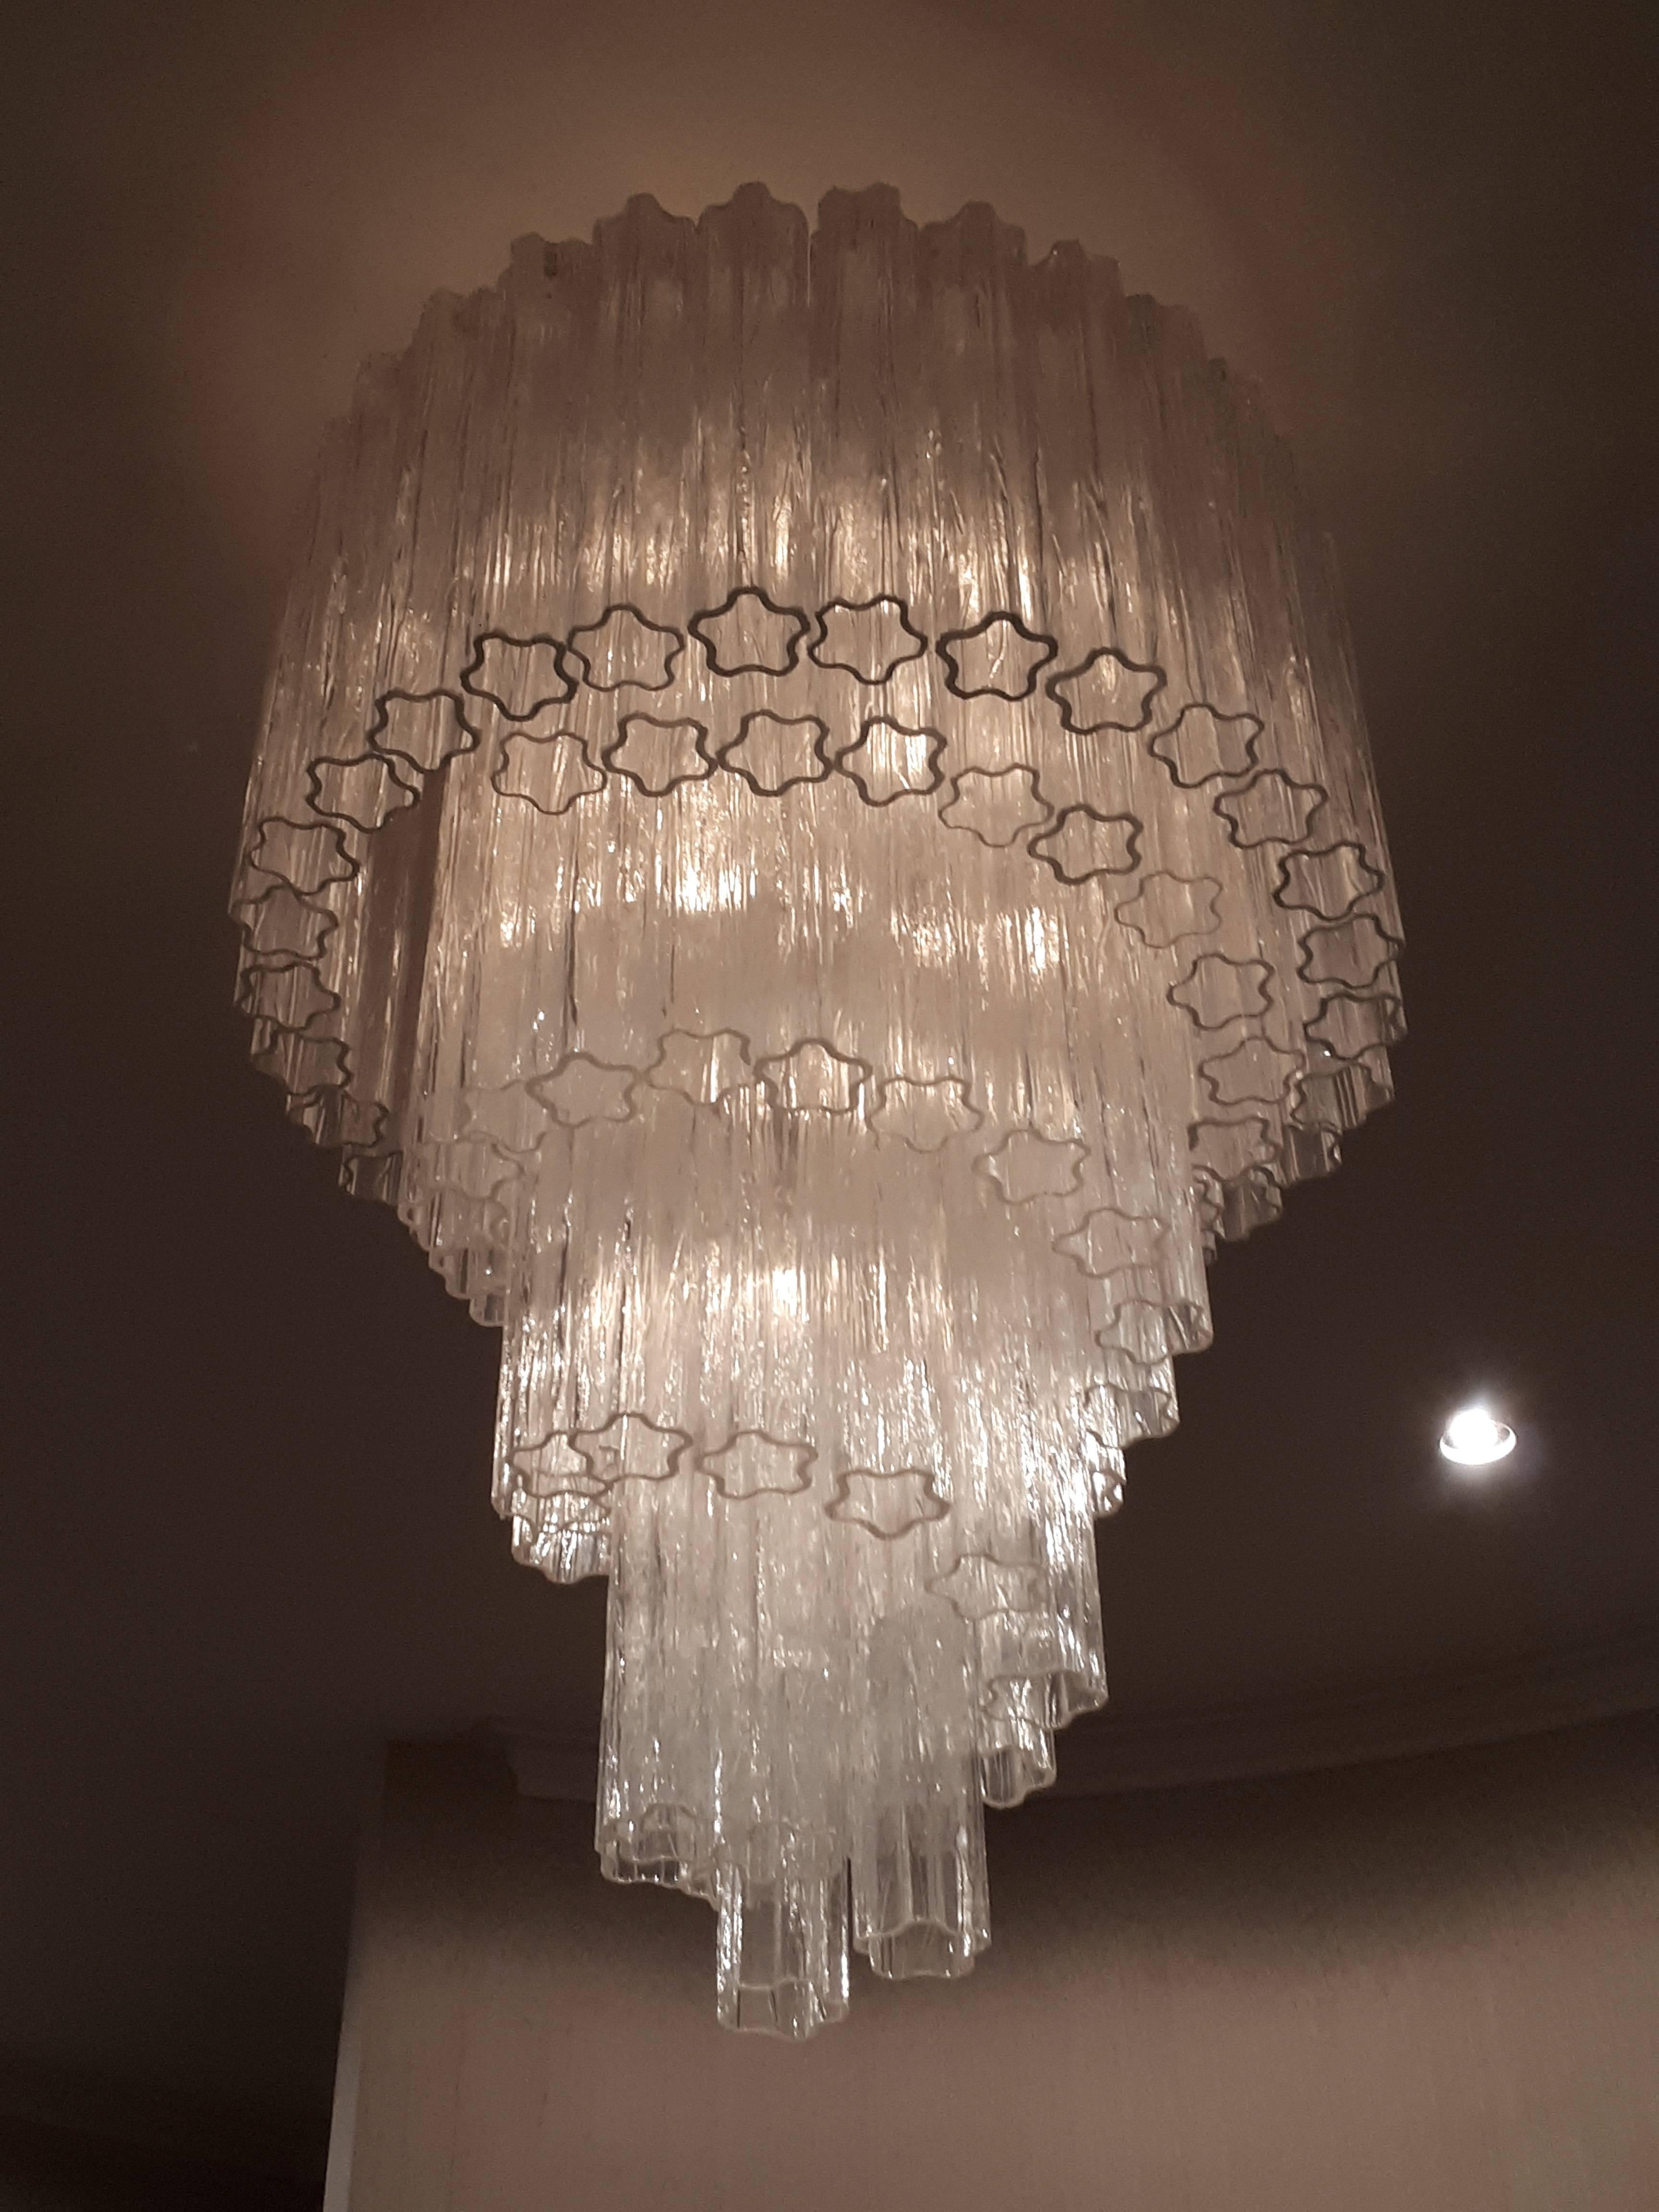 Original huge sculptural chandelier made of thick texturized  clear glass pieces .

Each shade measure 16 inches in lenght . 

Frame is enameled bone  white. 

Measure 52 inches high by 31 inches wide. 

Contain 10  regular size E26 ceramic socket